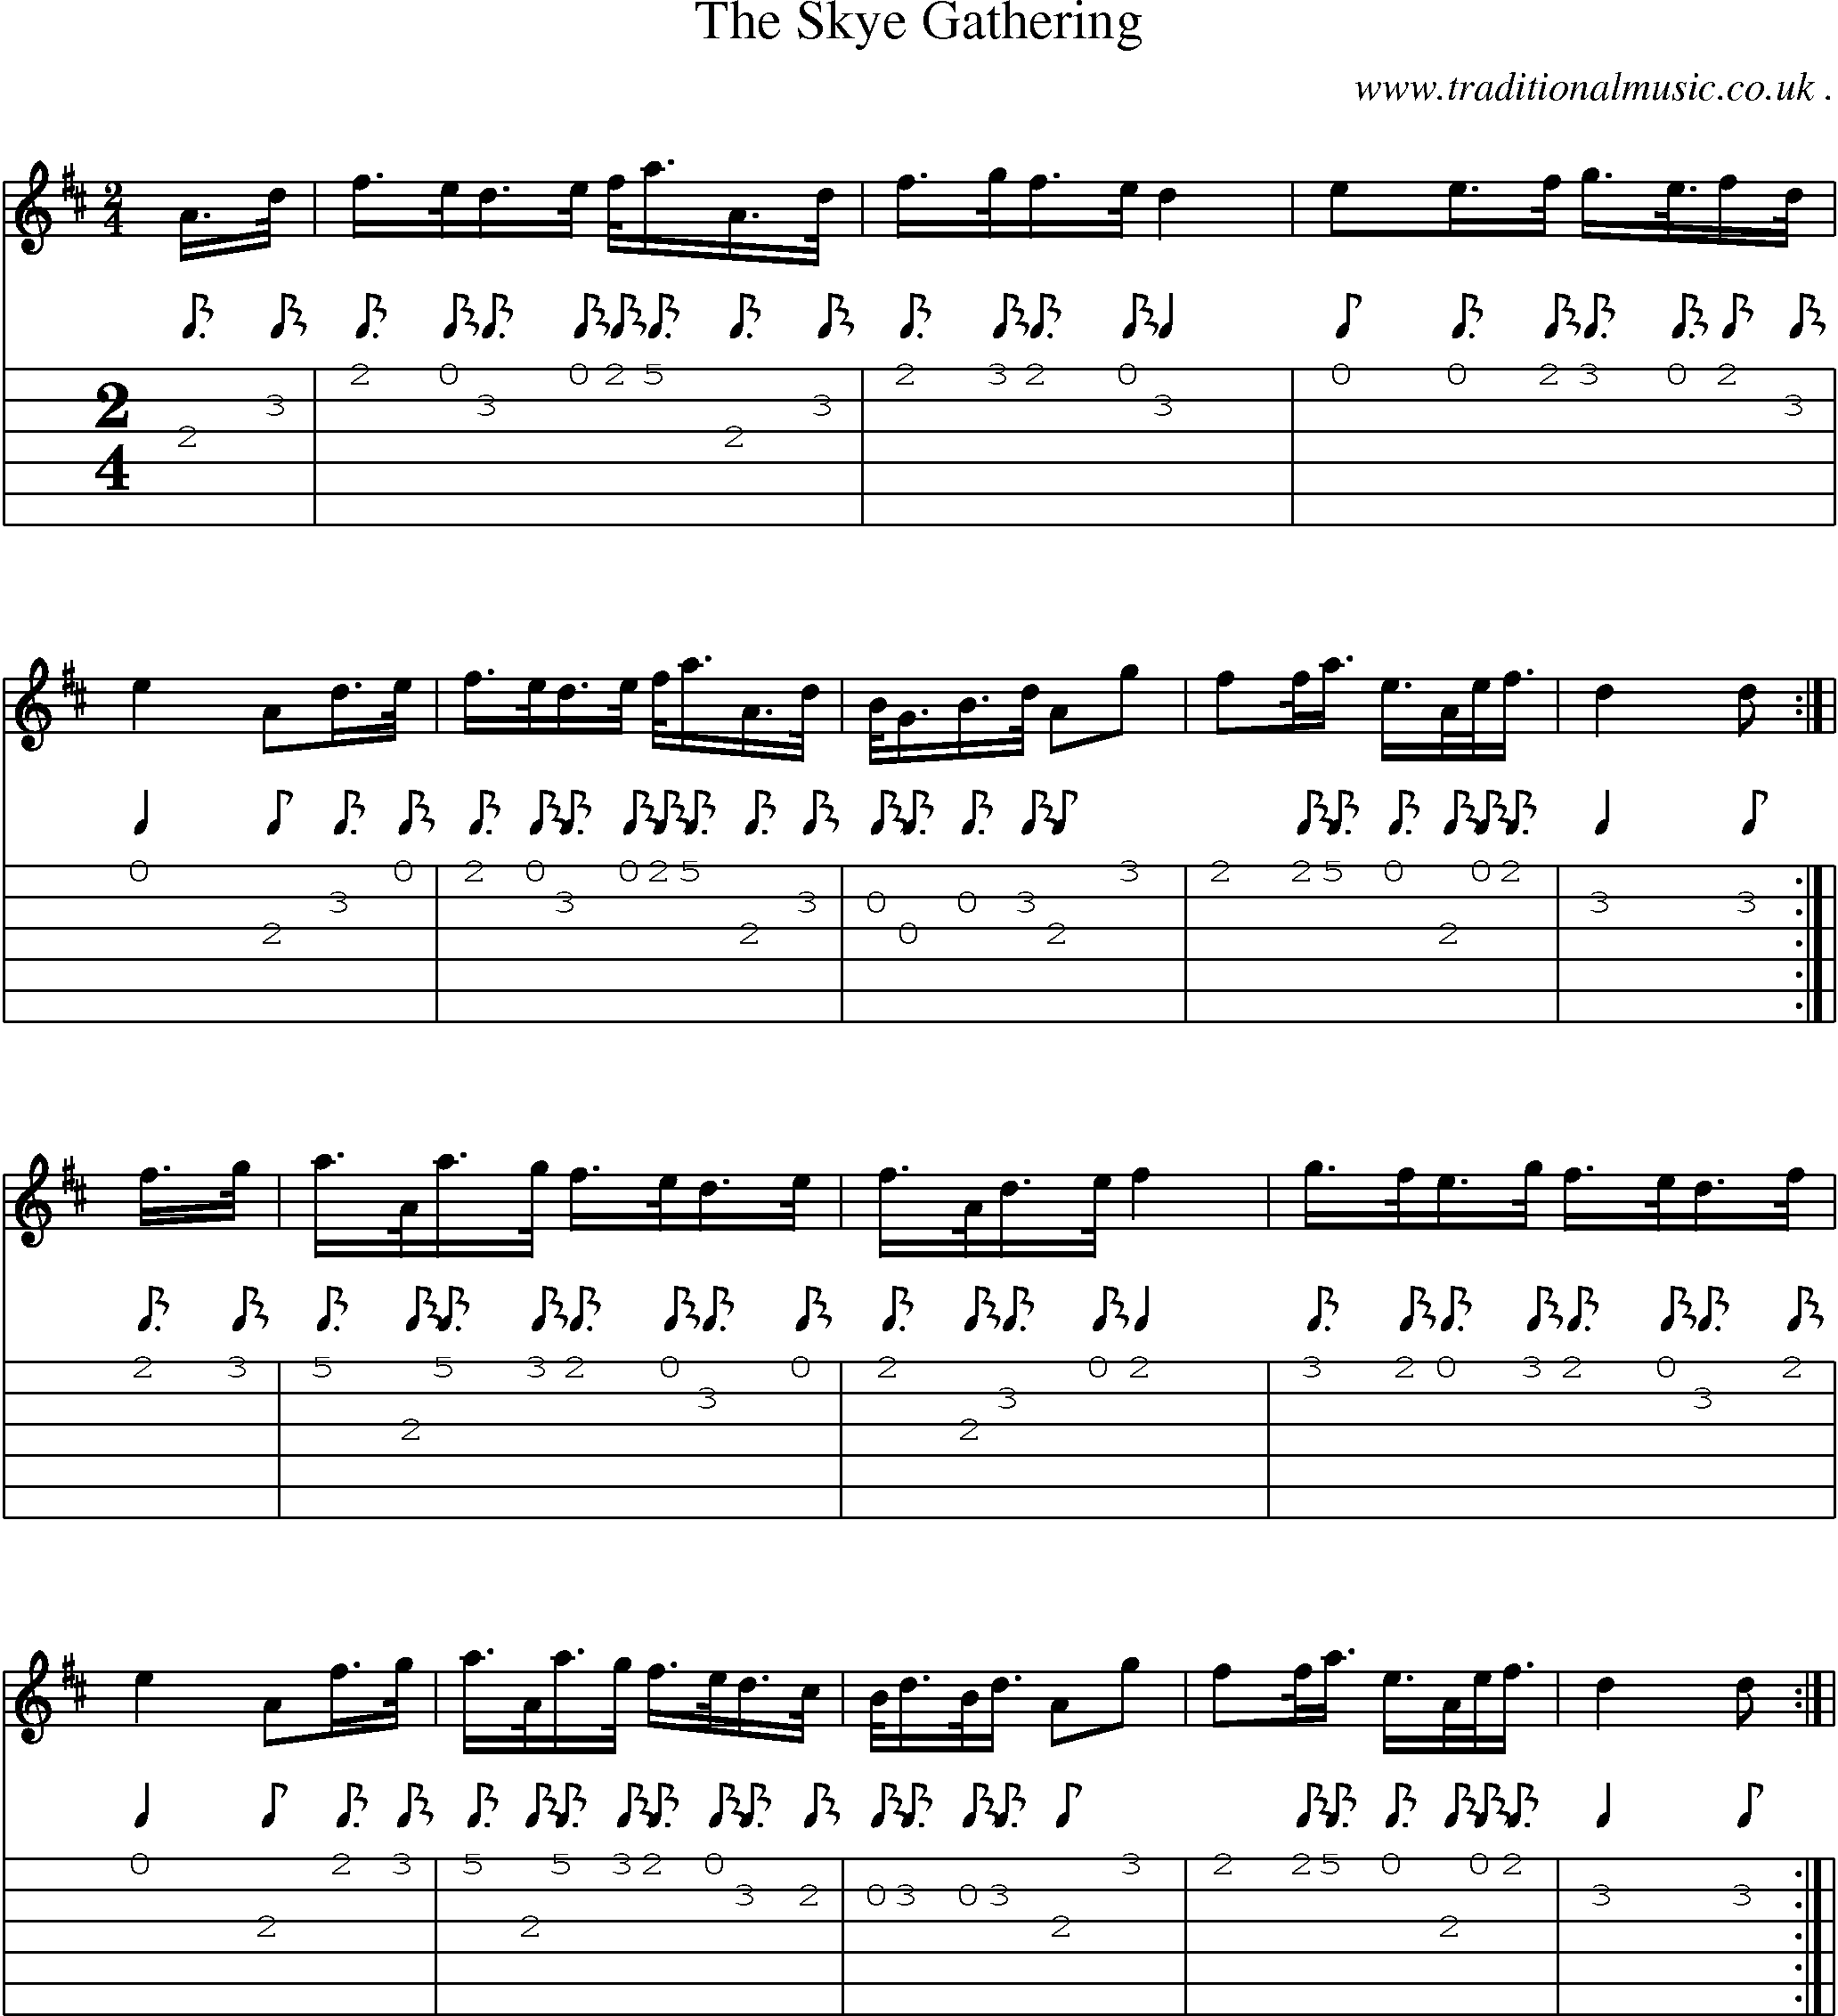 Sheet-Music and Guitar Tabs for The Skye Gathering